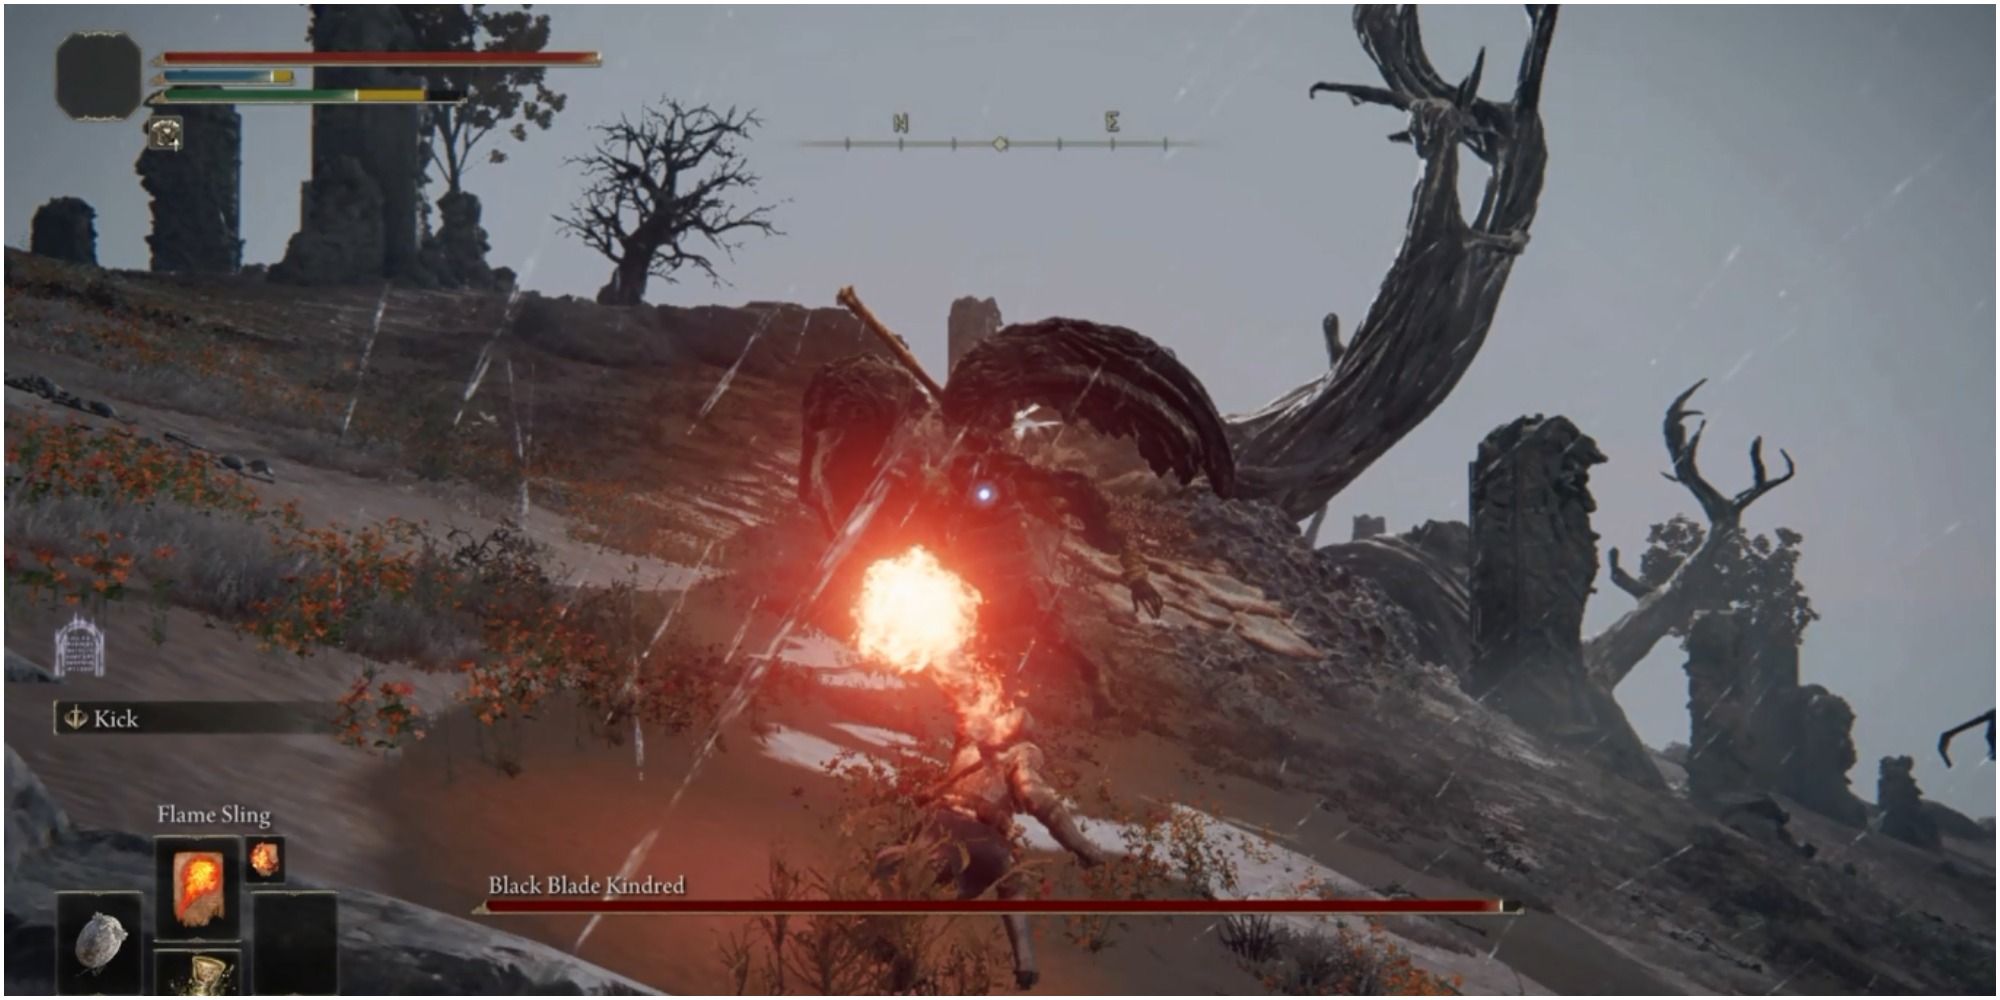 The player throwing Fire at the boss.